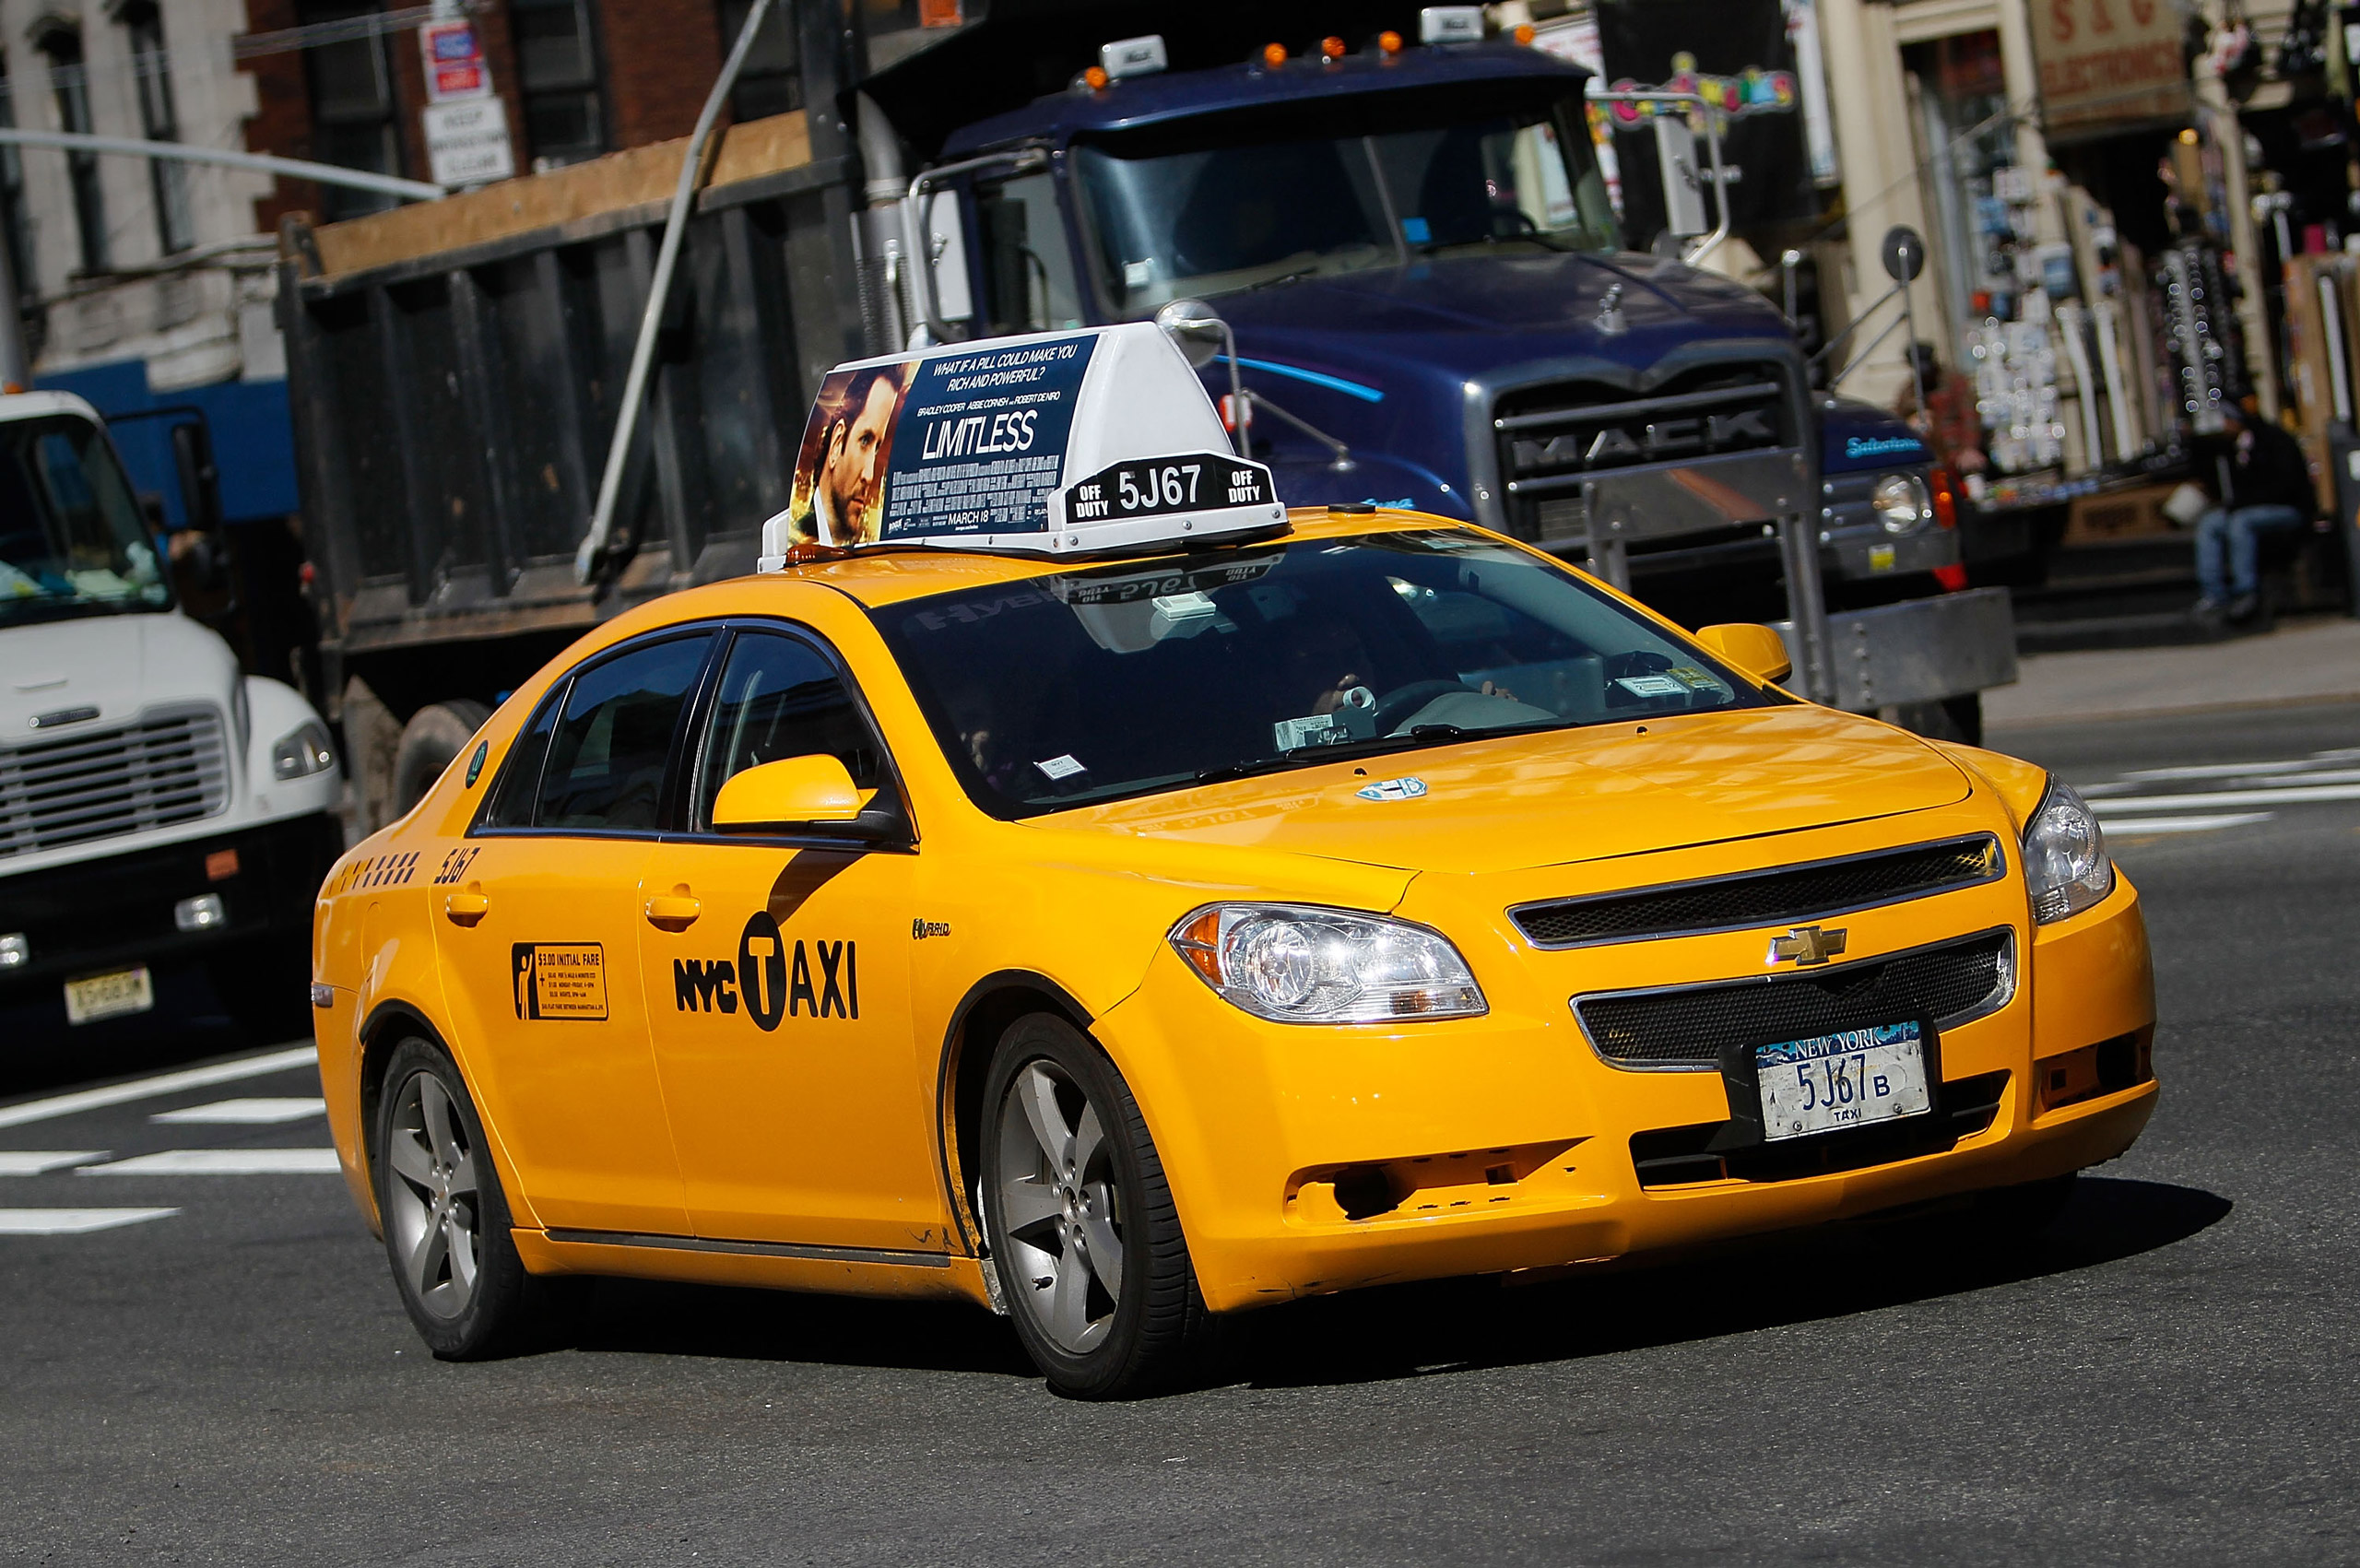 A gas-electric hybrid taxi drives on a street on March 1, 2011 in New York City. In May 2007, New York City Mayor Michael Bloomberg proposed a five-year plan to switch New York City's taxicabs to more fuel-efficient hybrid vehicles. However, the plan was dropped after operators complained that the cost of maintaining the new cars outweighed the fuel savings. Today, New York City has around 4,300 hybrid taxis, representing almost 33 percent of the 13,237 taxis in service—the most in any city in North America.